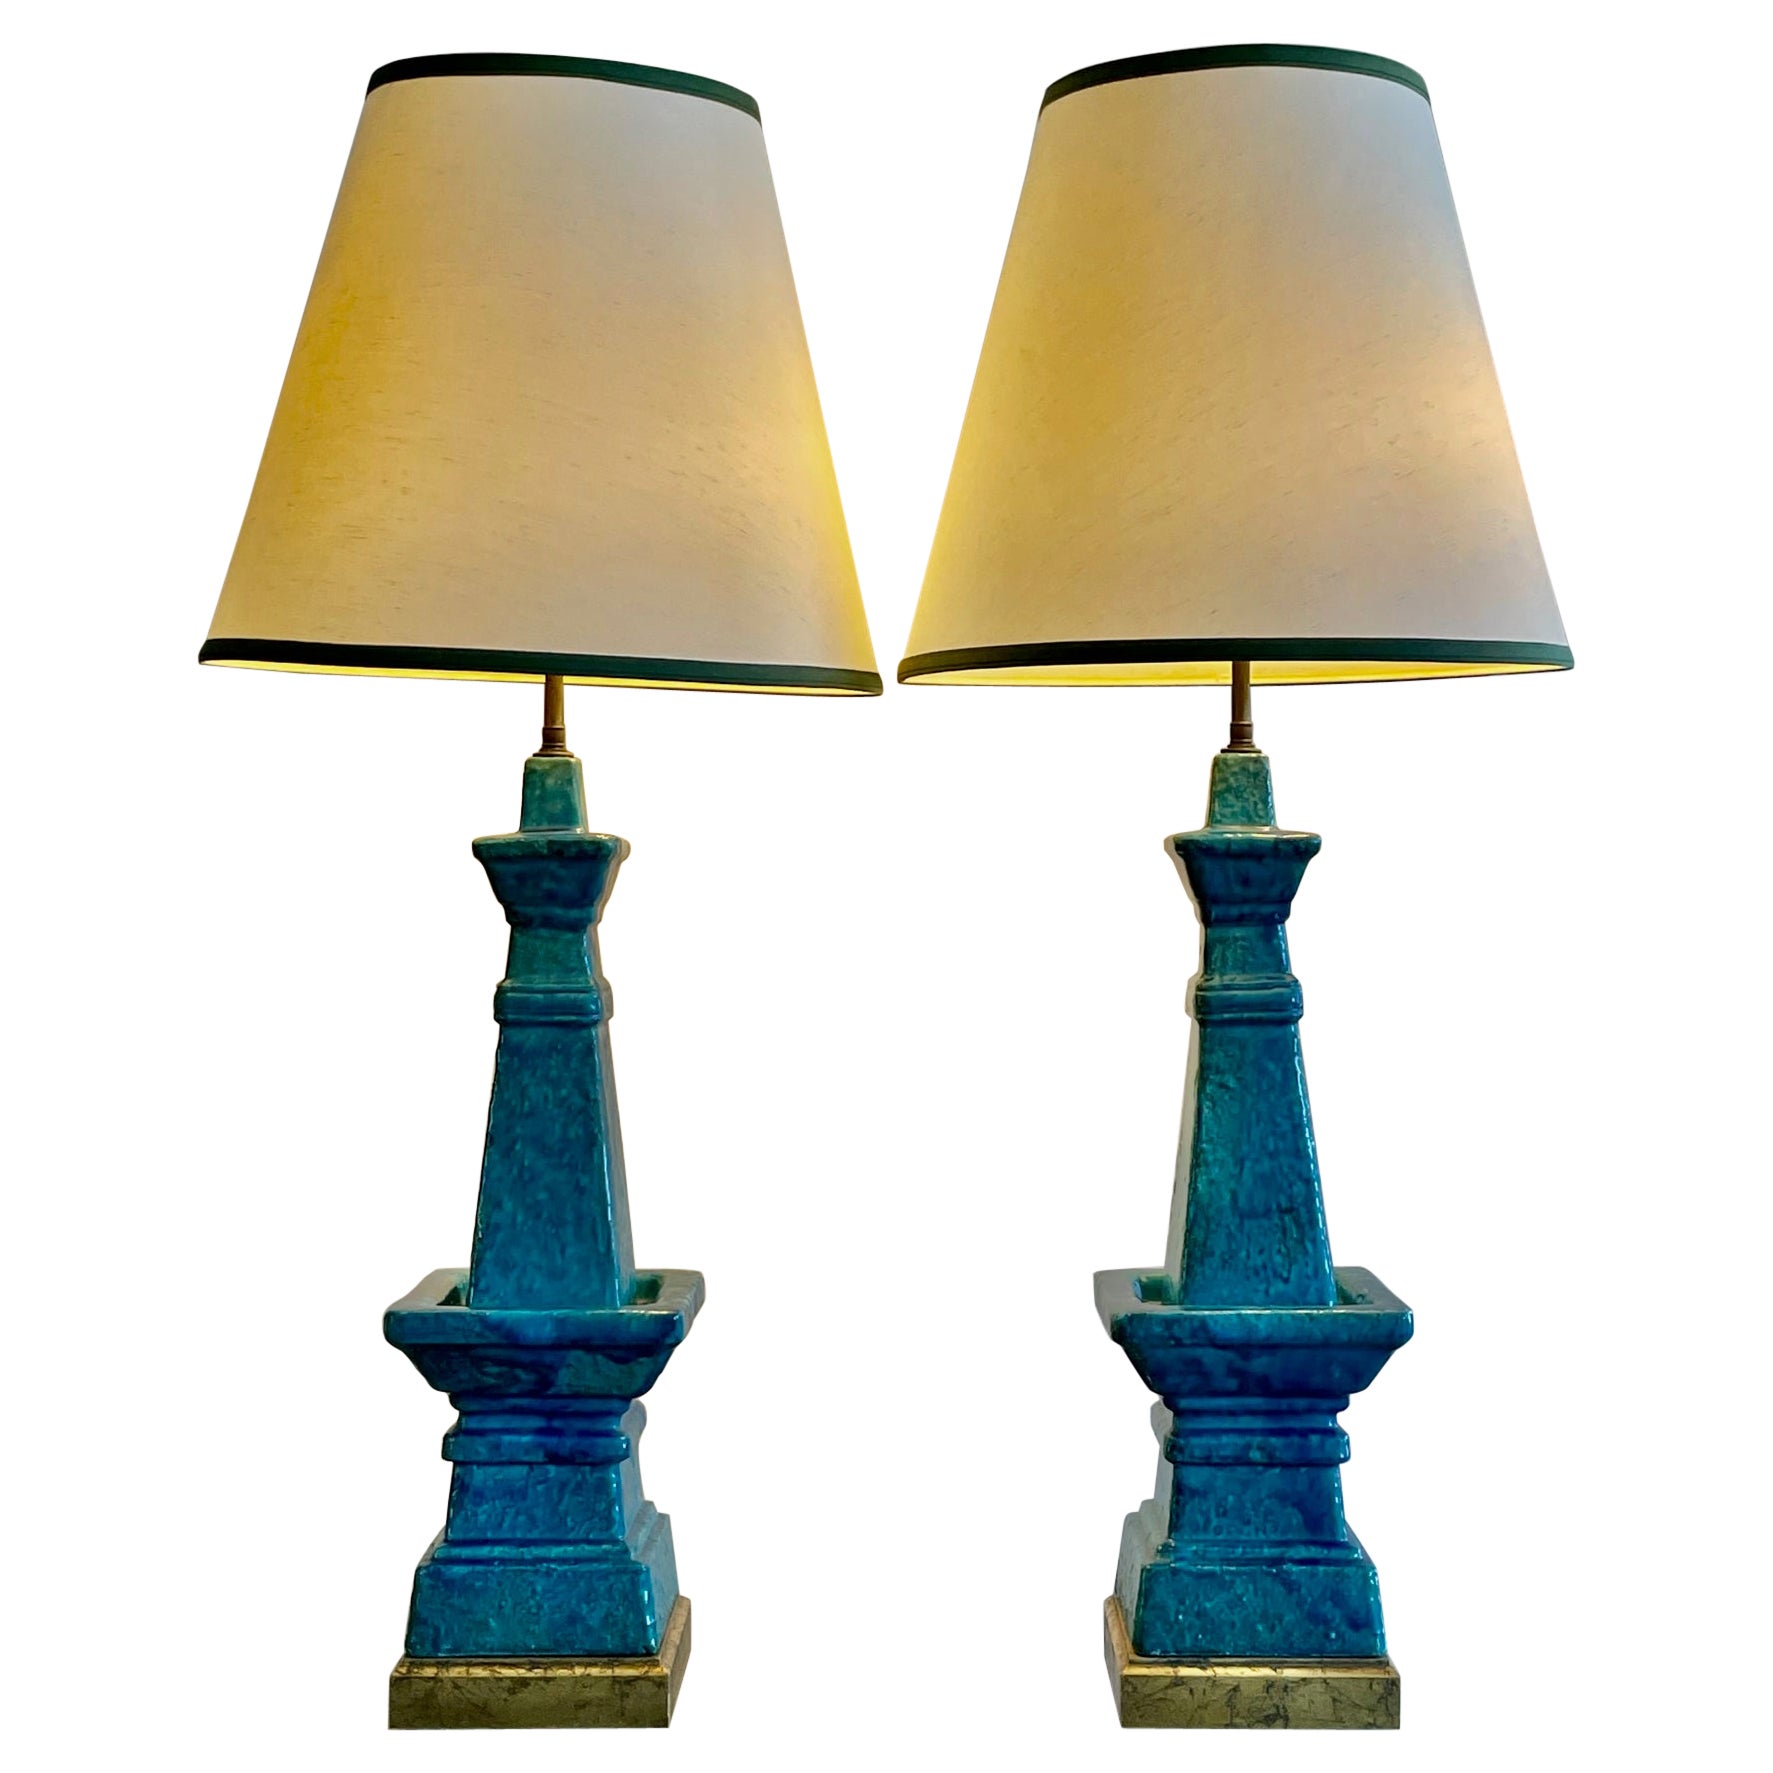 Pair of Architectural Bitossi Lamps For Sale